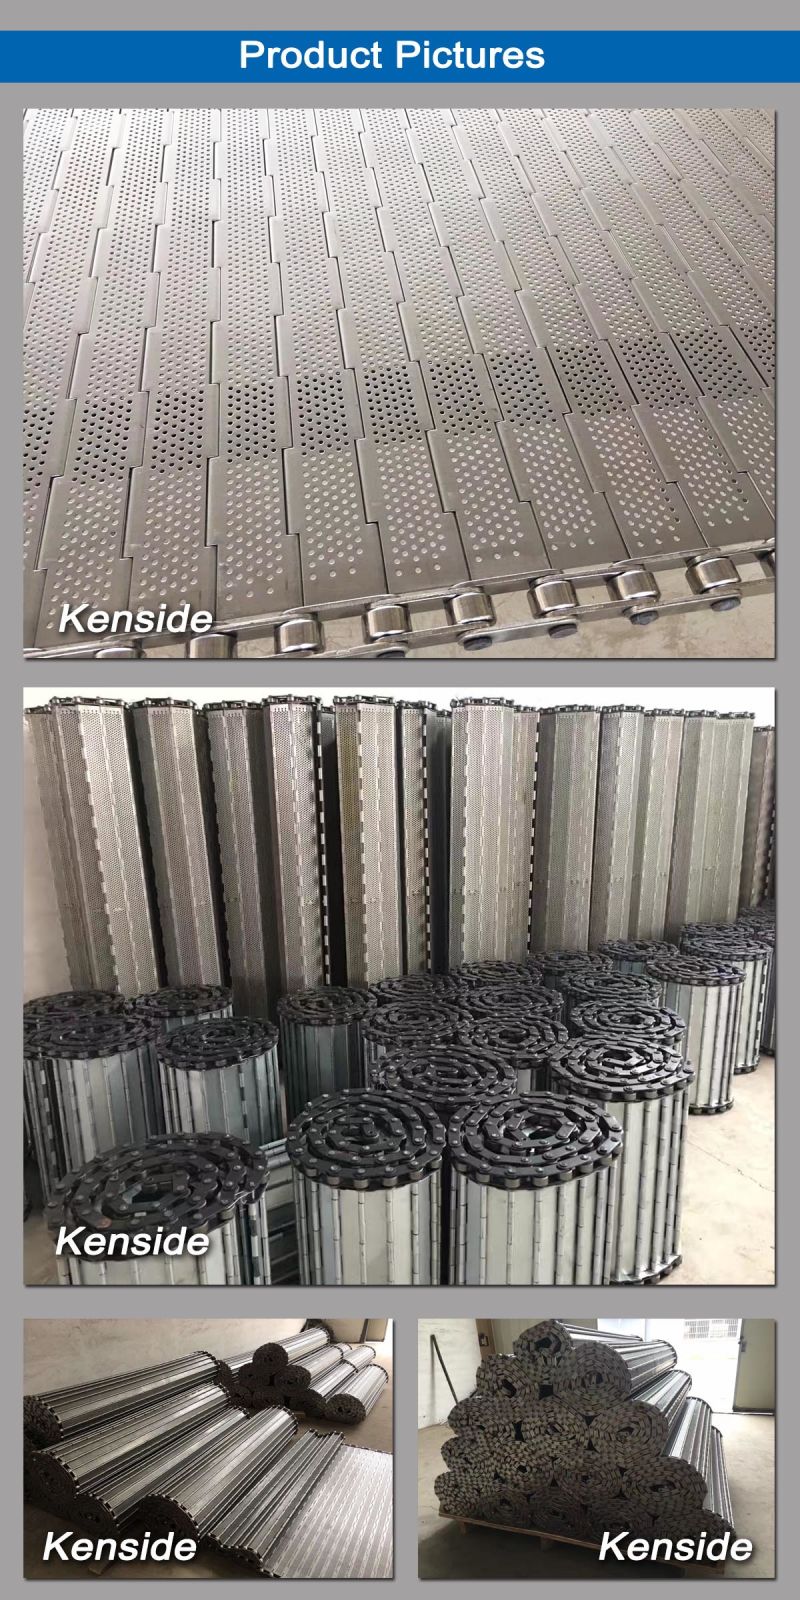 China Stainless Steel 304 Plate Link Perforated Conveyor Belt